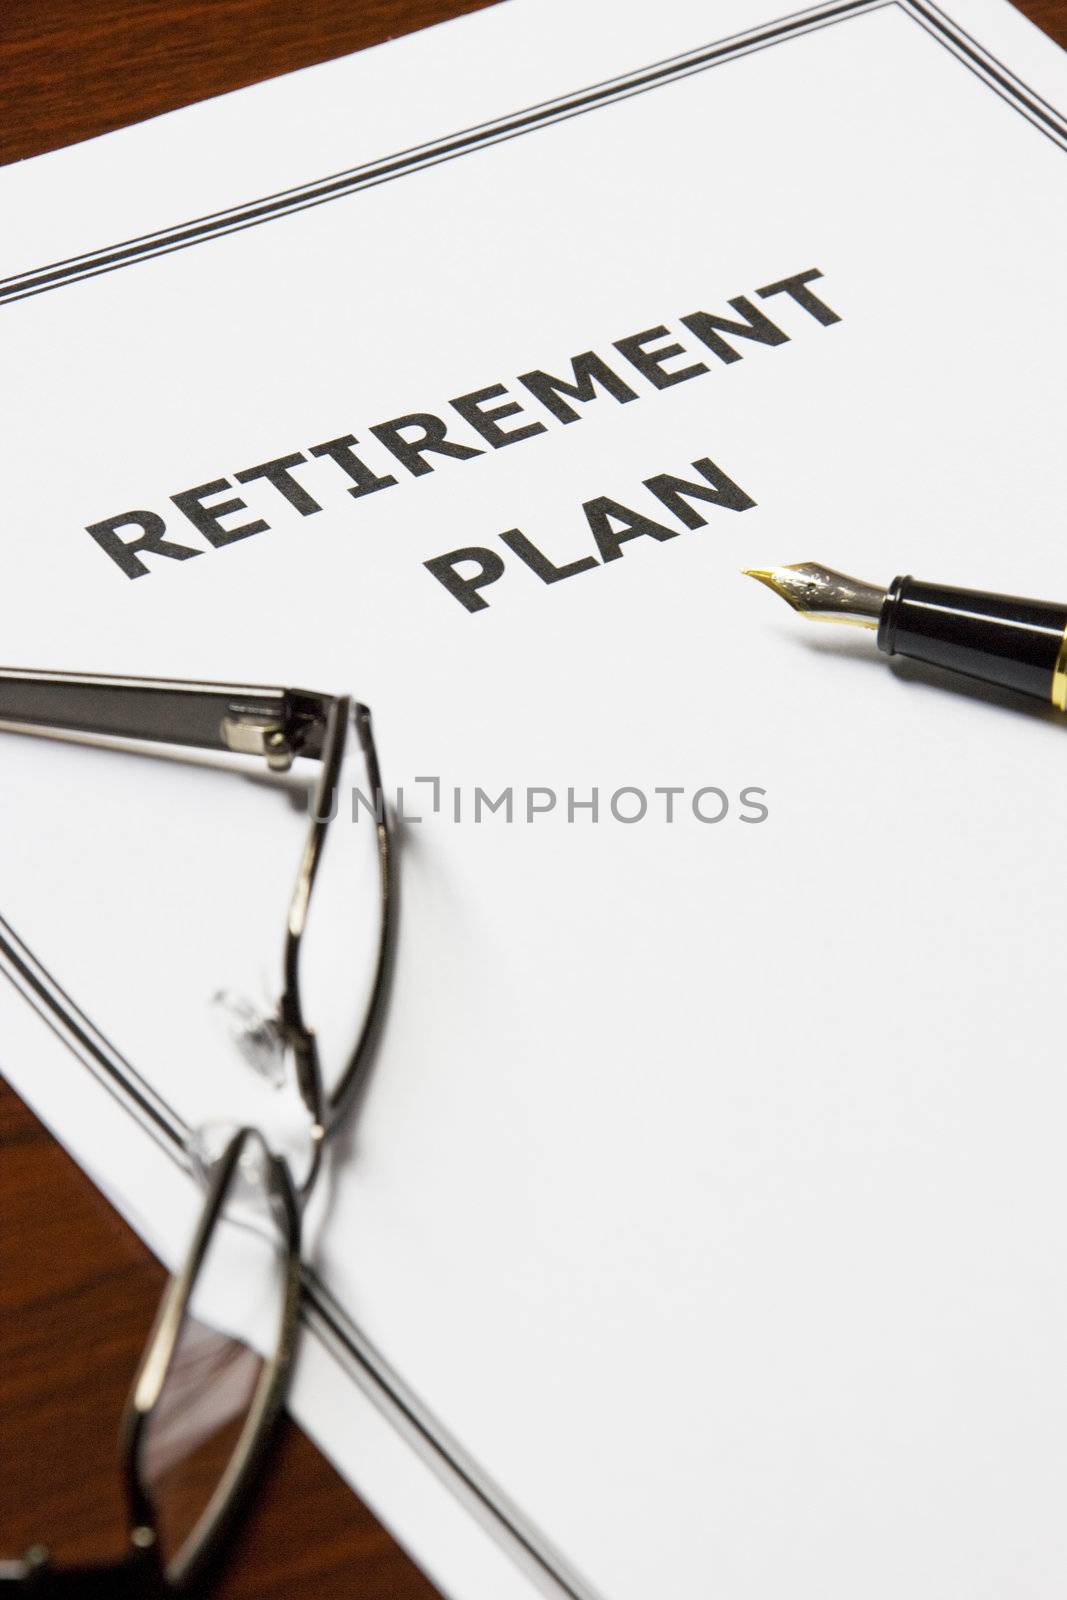 Image of a retirement plan on an office table.